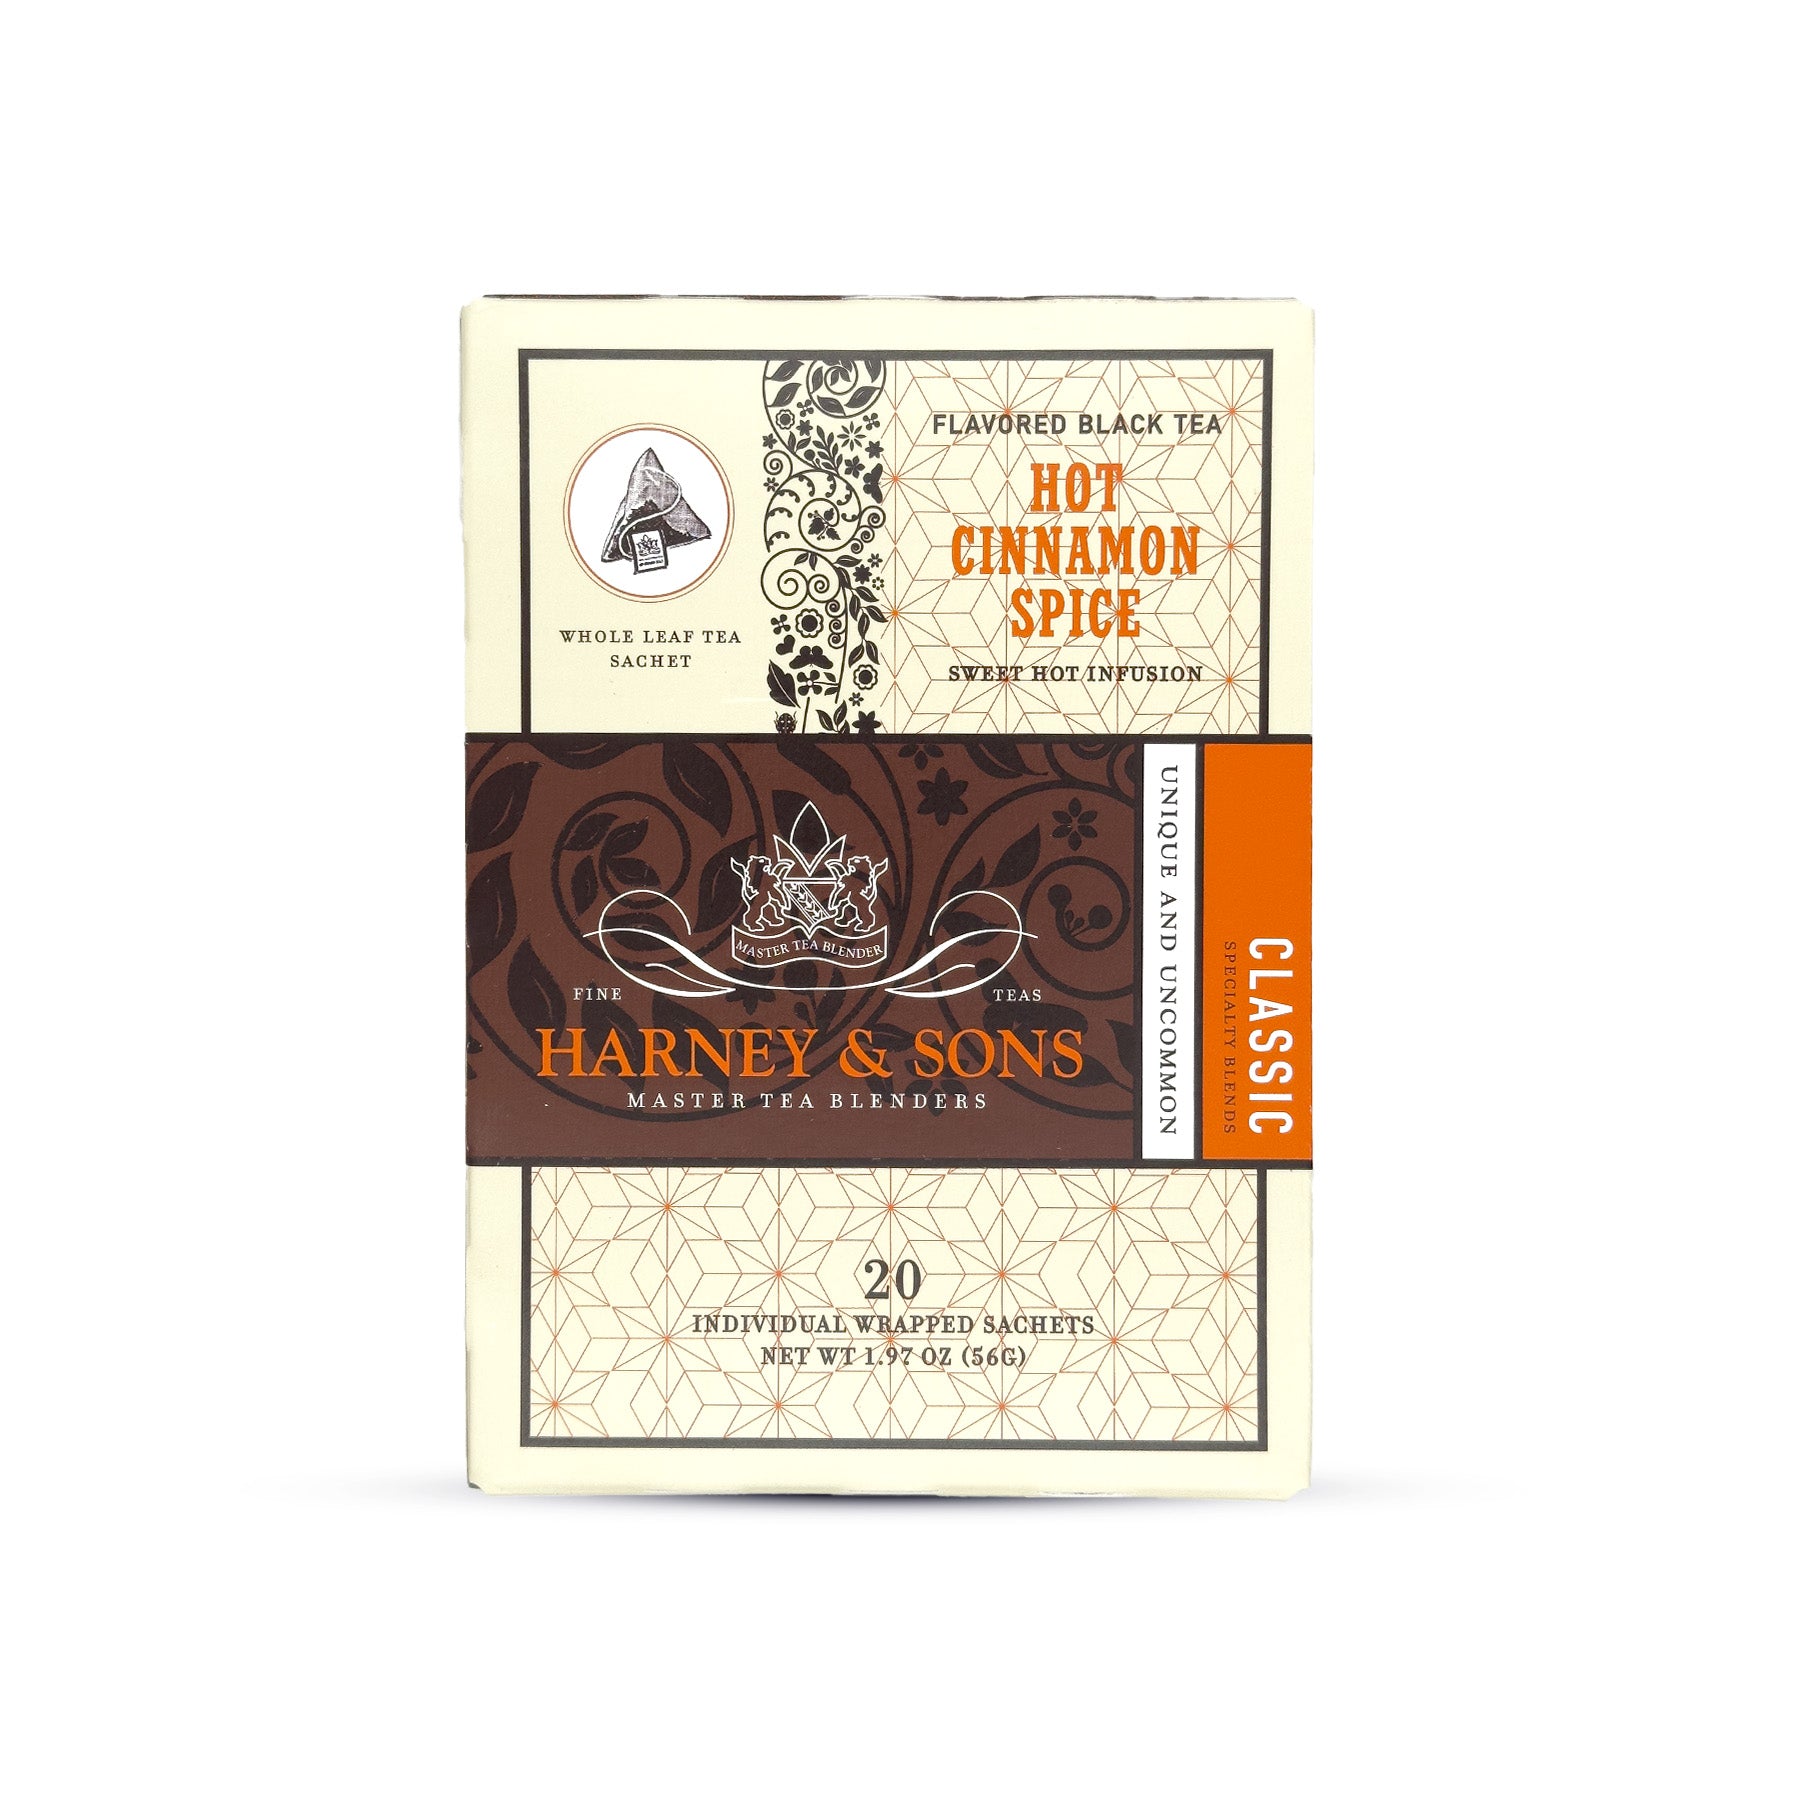 Hot Cinnamon Spice - Box of 20 Individually Wrapped Sachets - Harney & Sons Fine Teas Europe